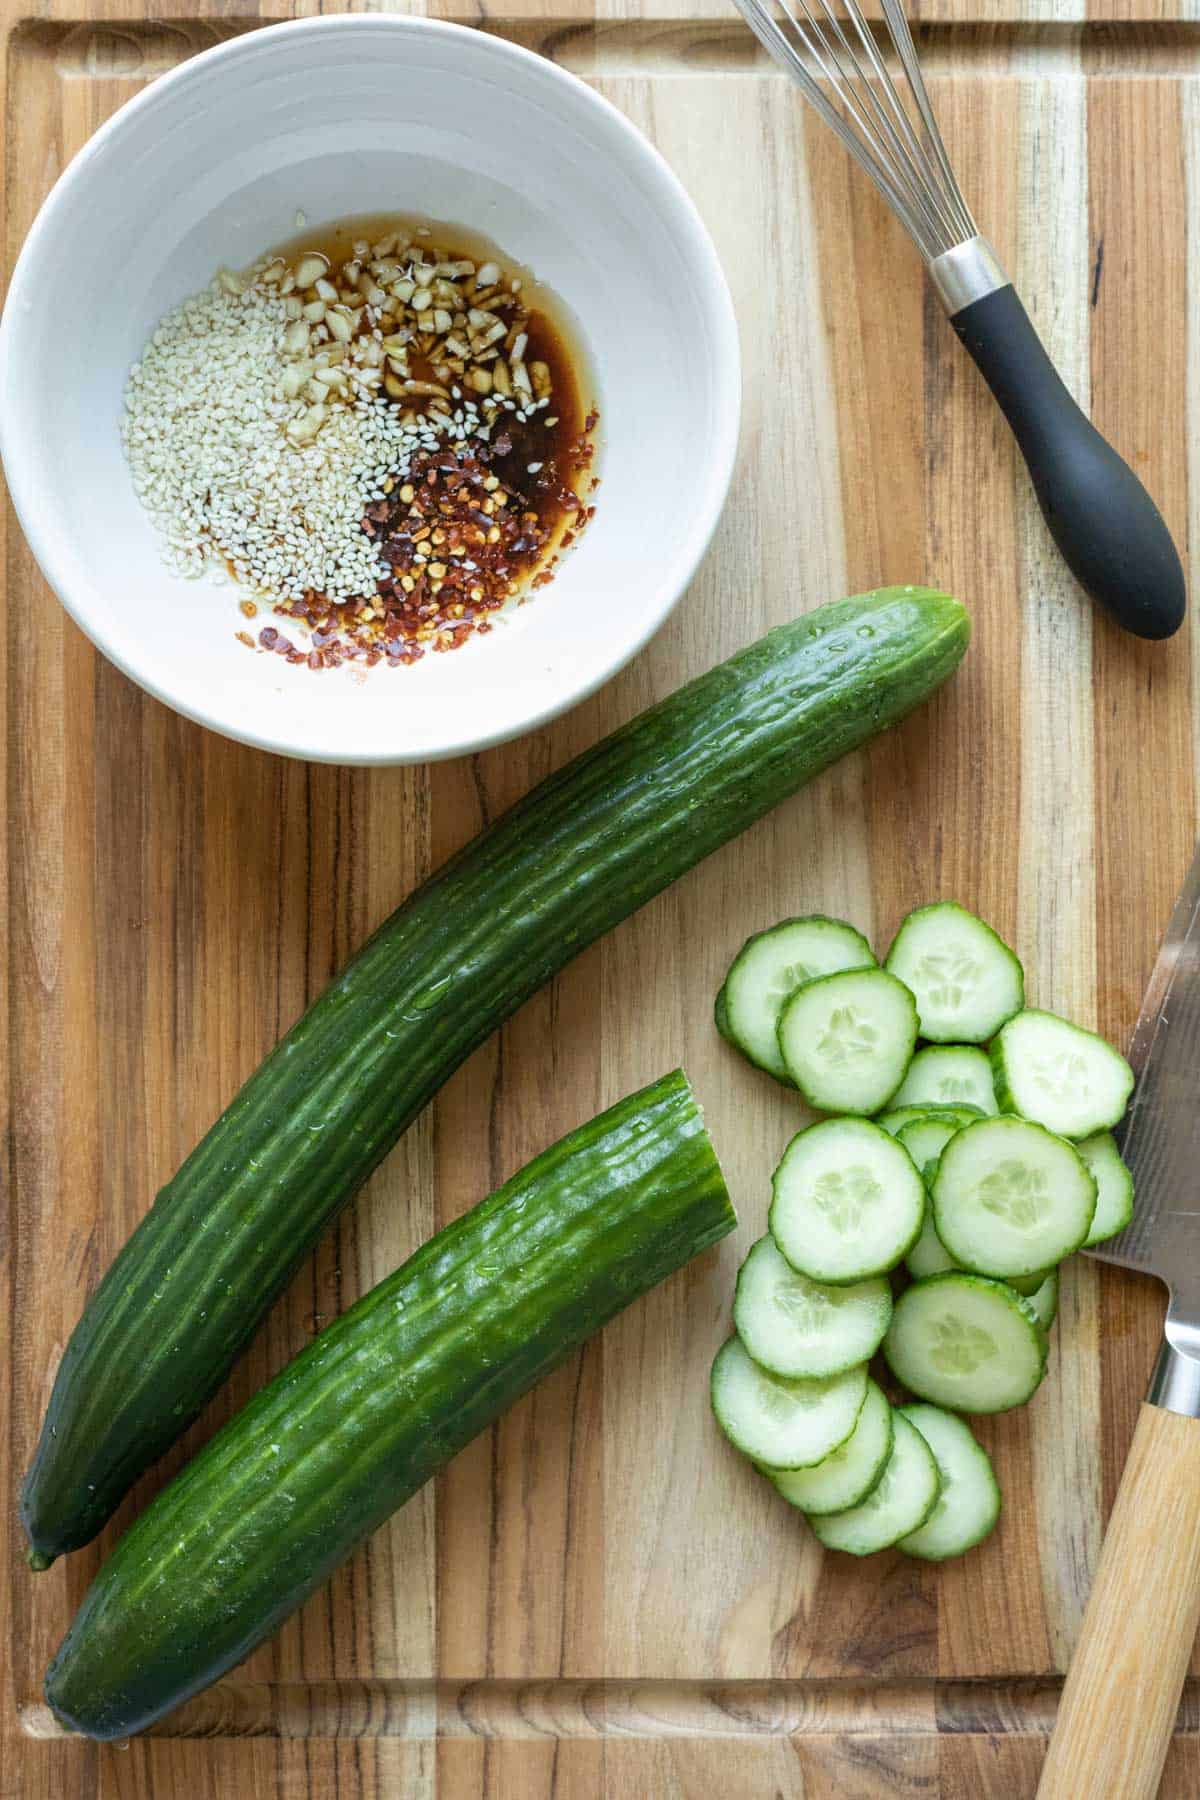 Slicing hot house cucumbers and mixing spicy Asian dressing in a bowl.